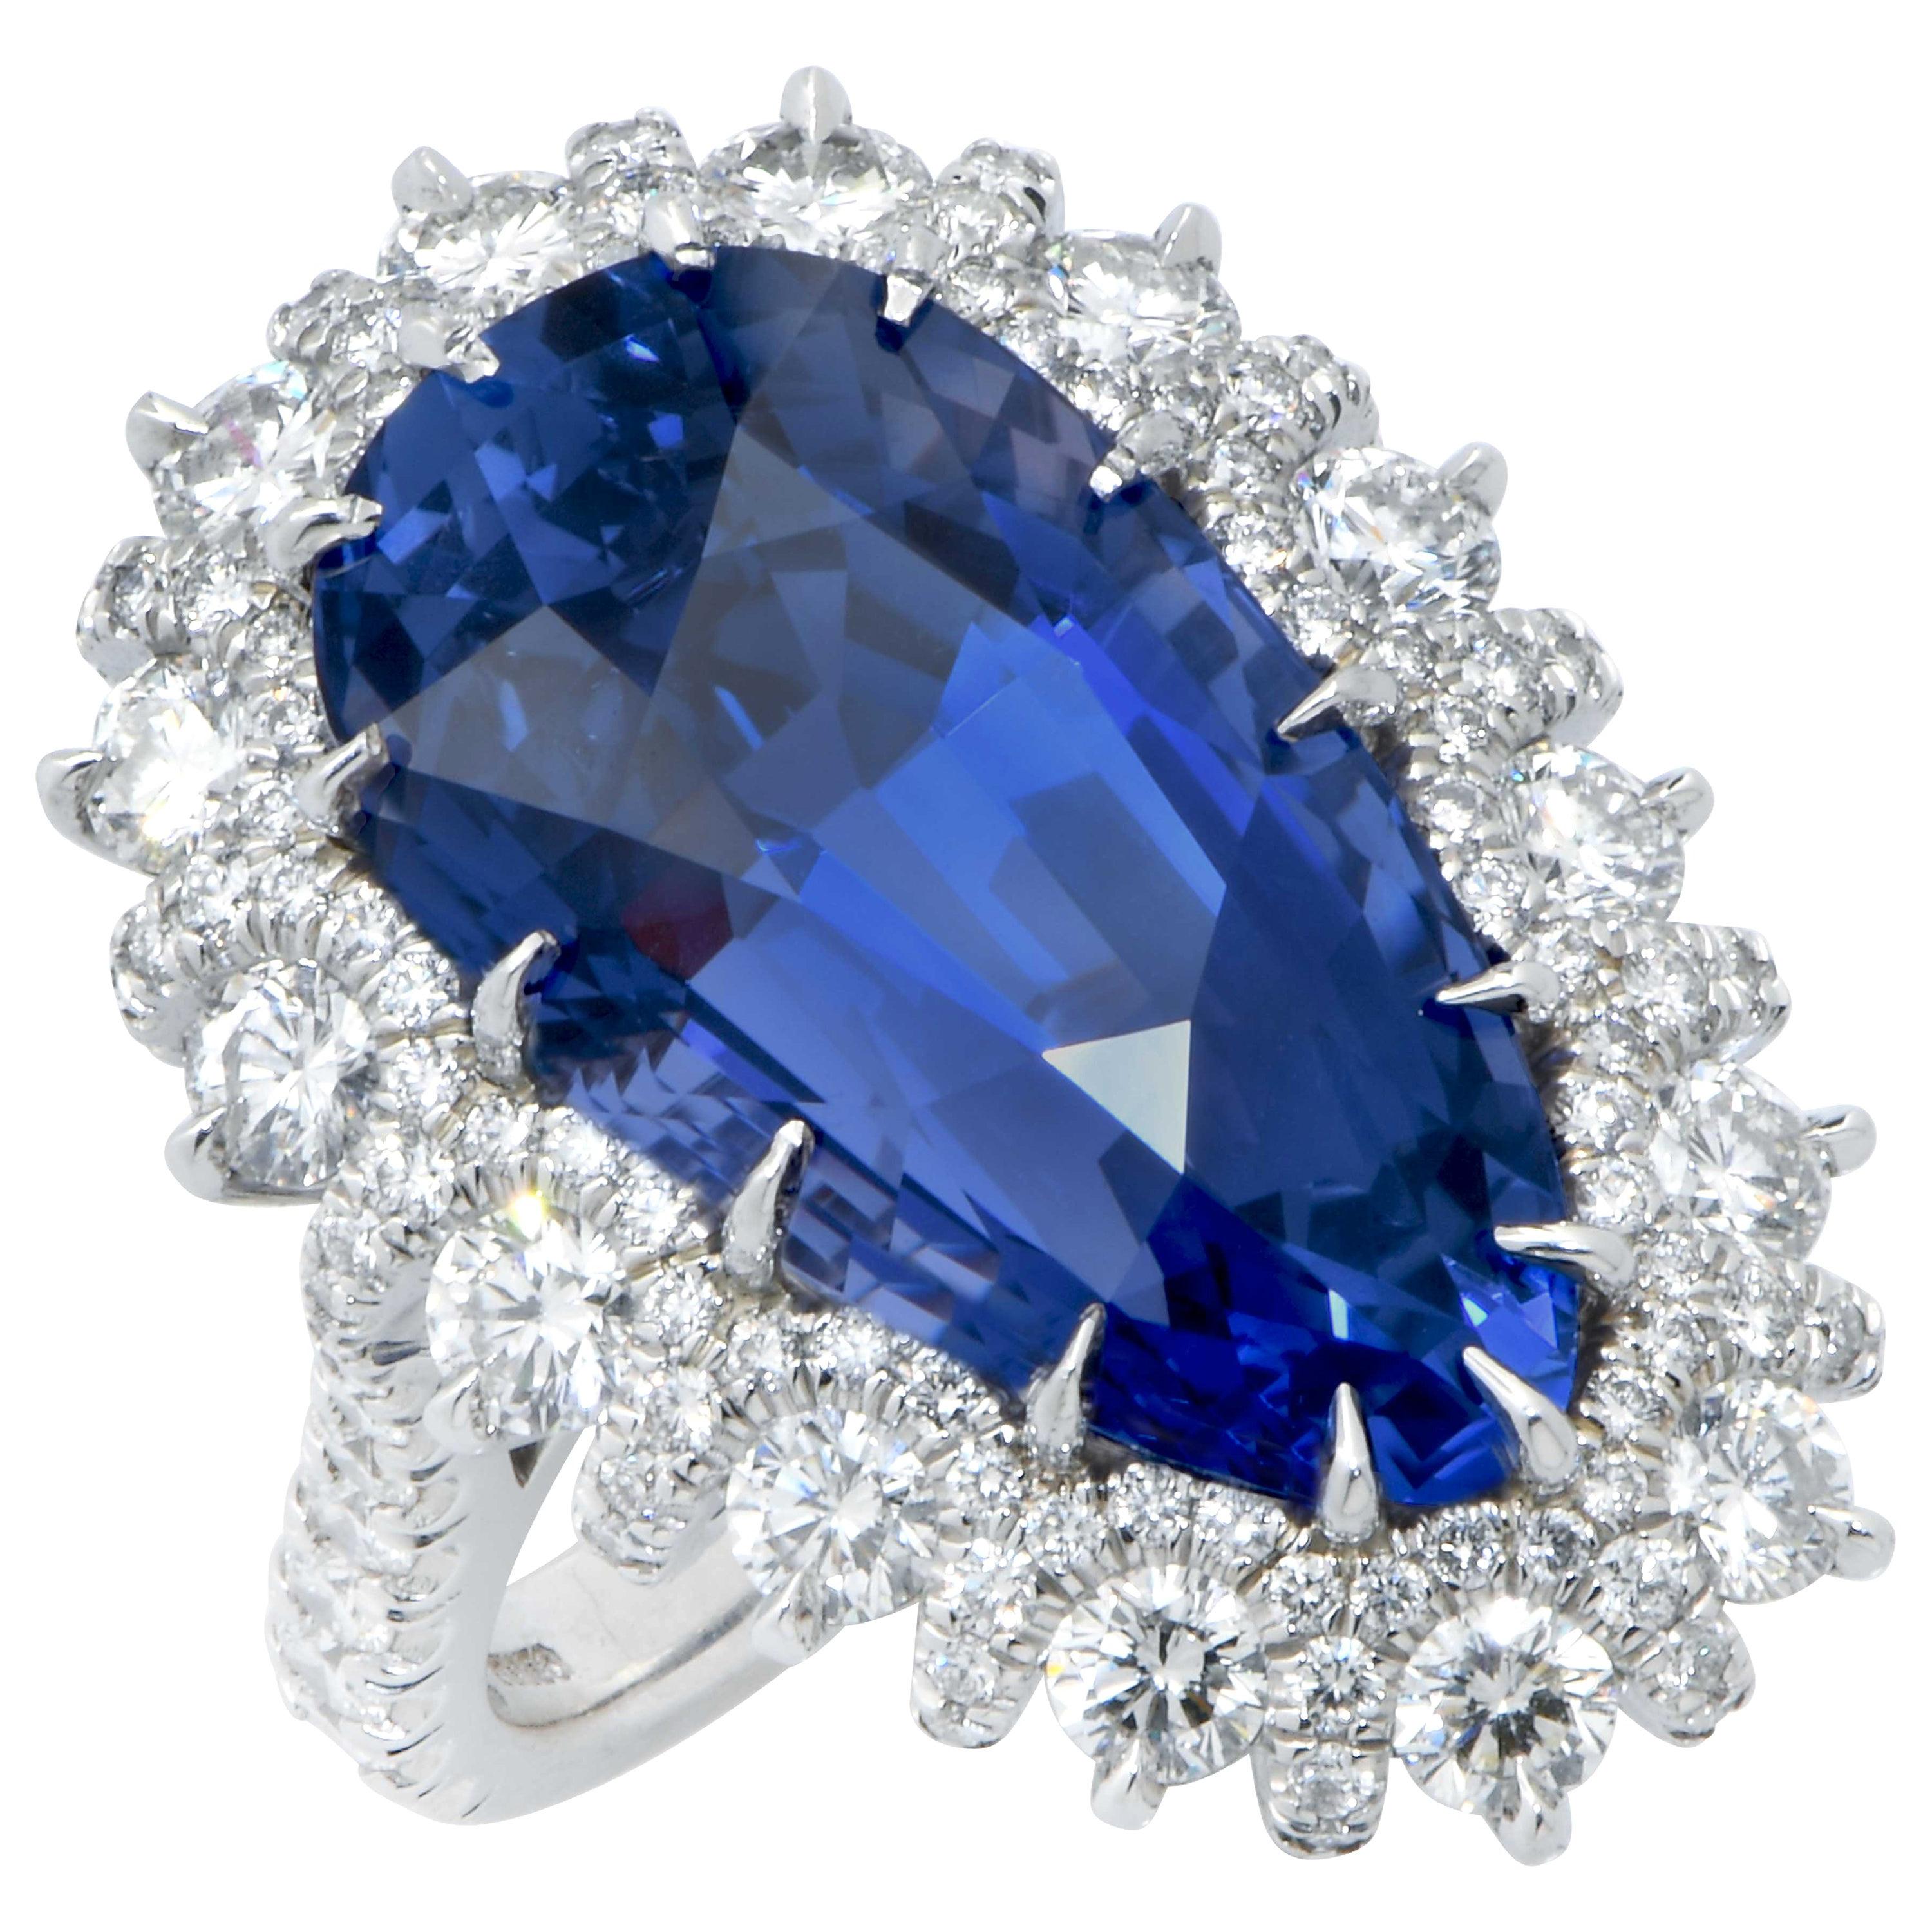 Important 19 Carat AGL Graded Pear Shaped Sapphire and Diamond Ring